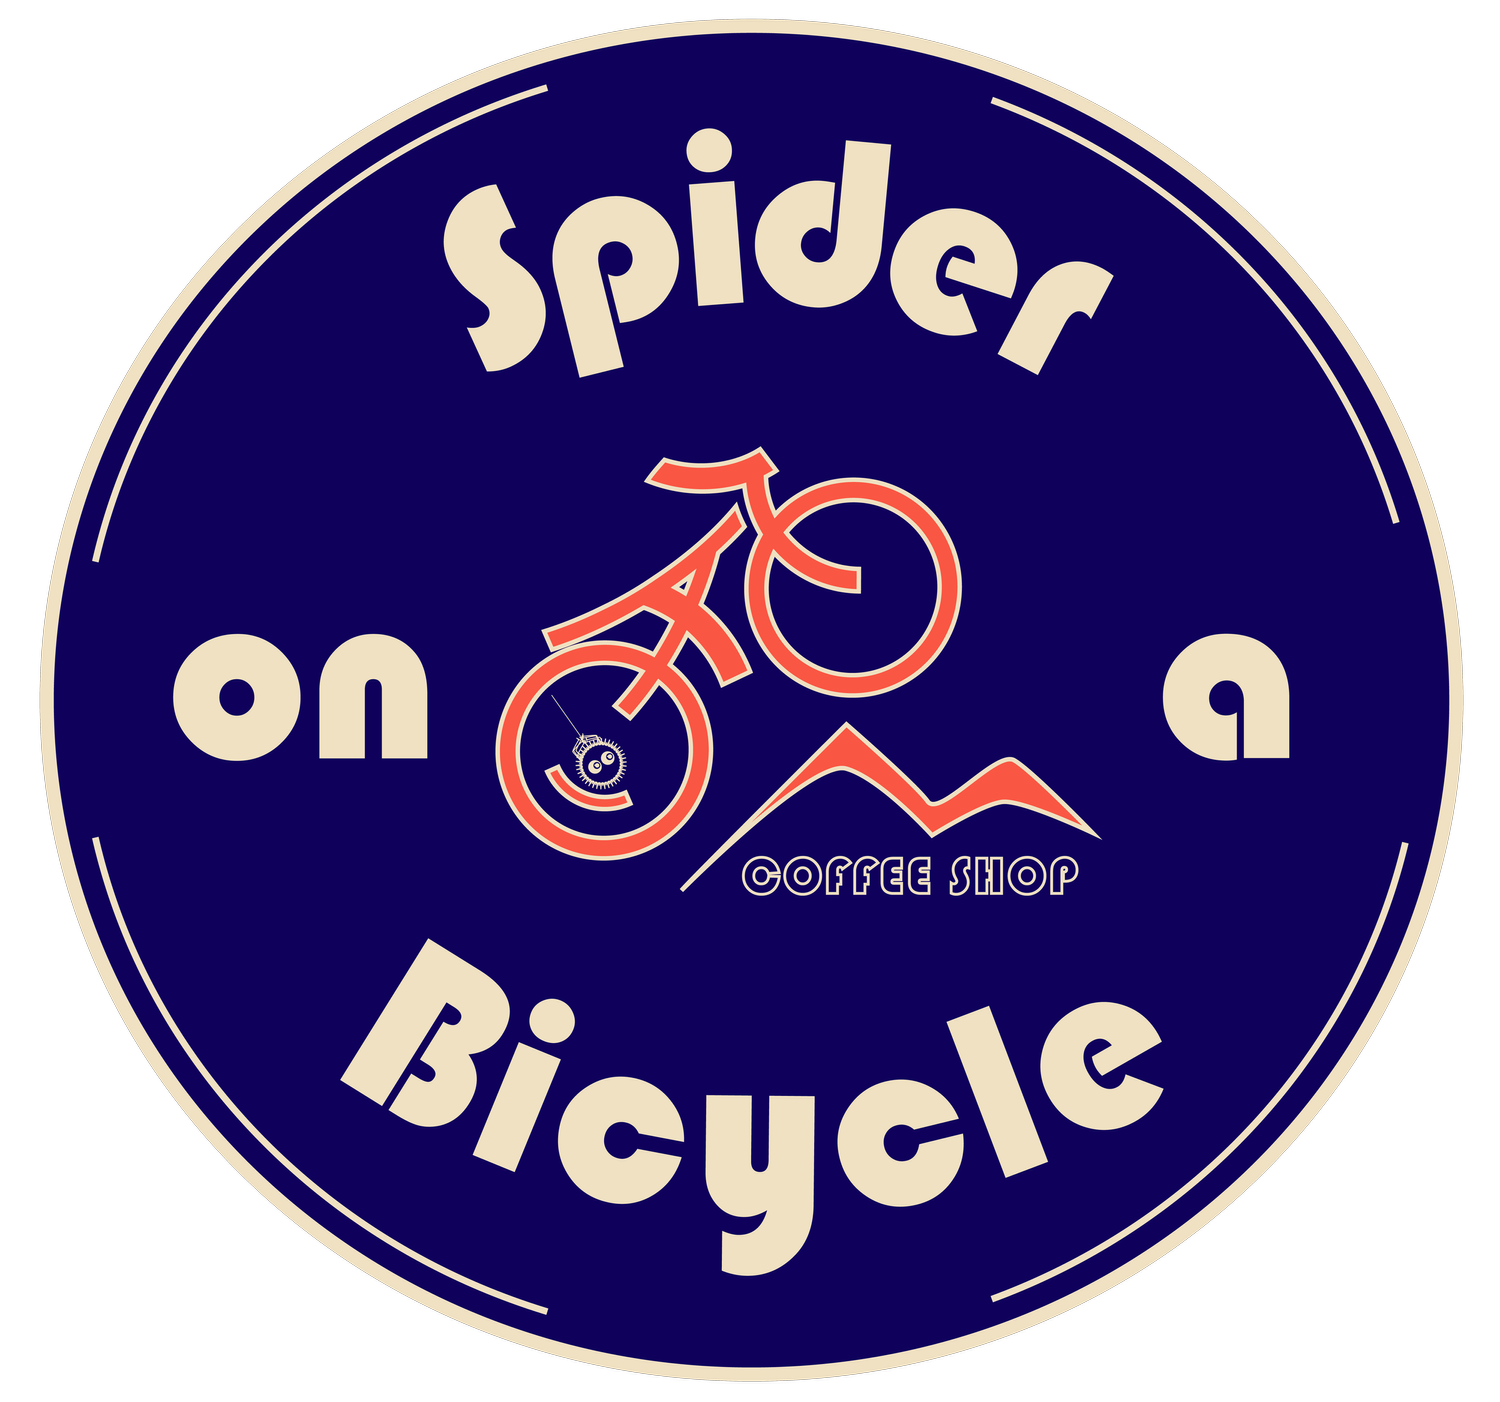 Spider on a Bicycle